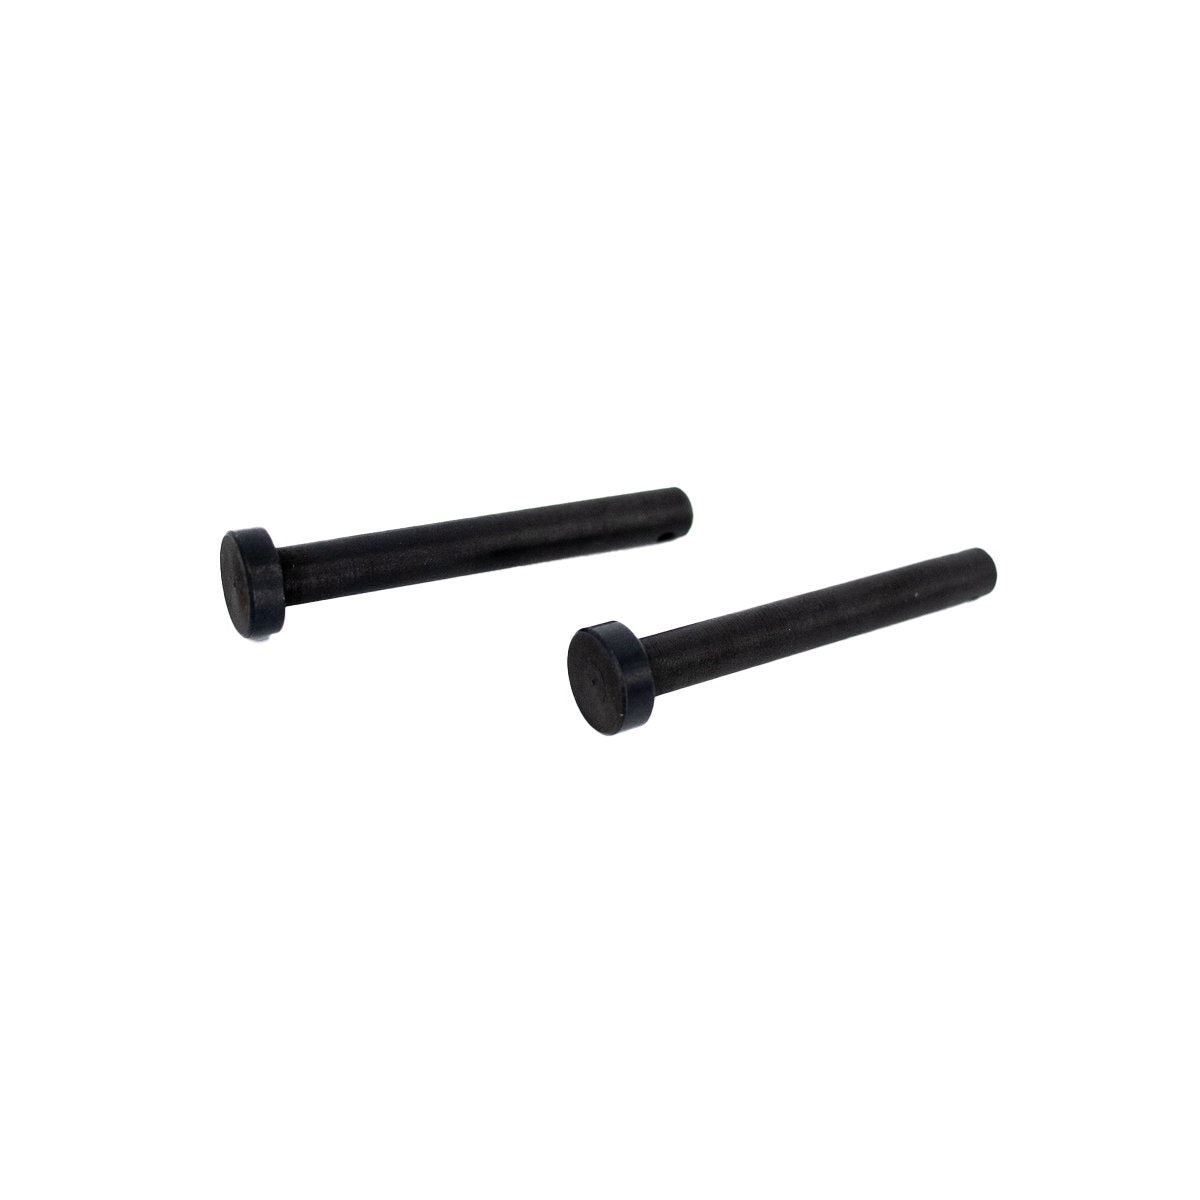 Receiver Pins Paintball Replacement Parts - Eminent Paintball And Airsoft